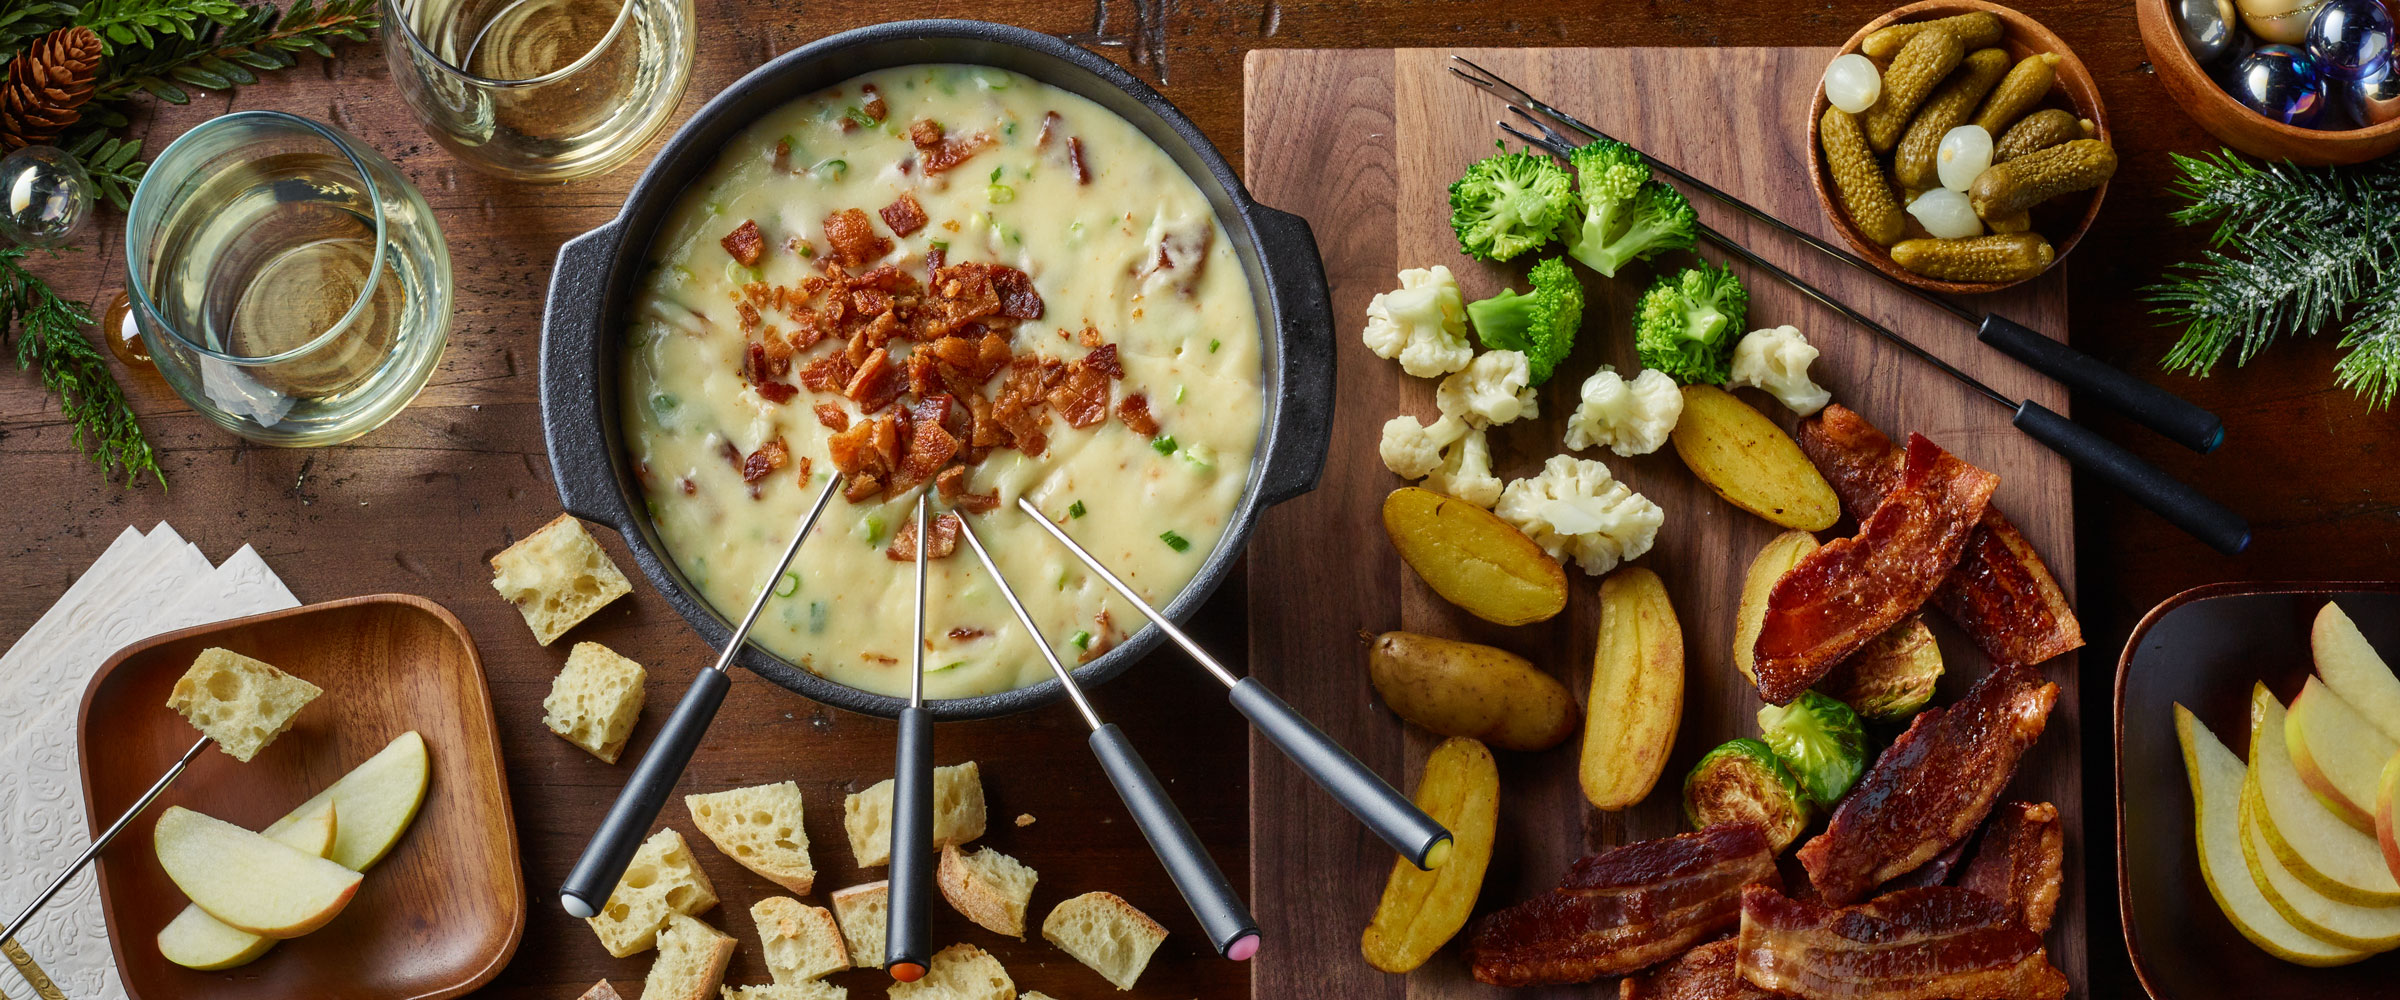 Bacon Fondue and accompaniments like crackers, vegetables and slices of bacon